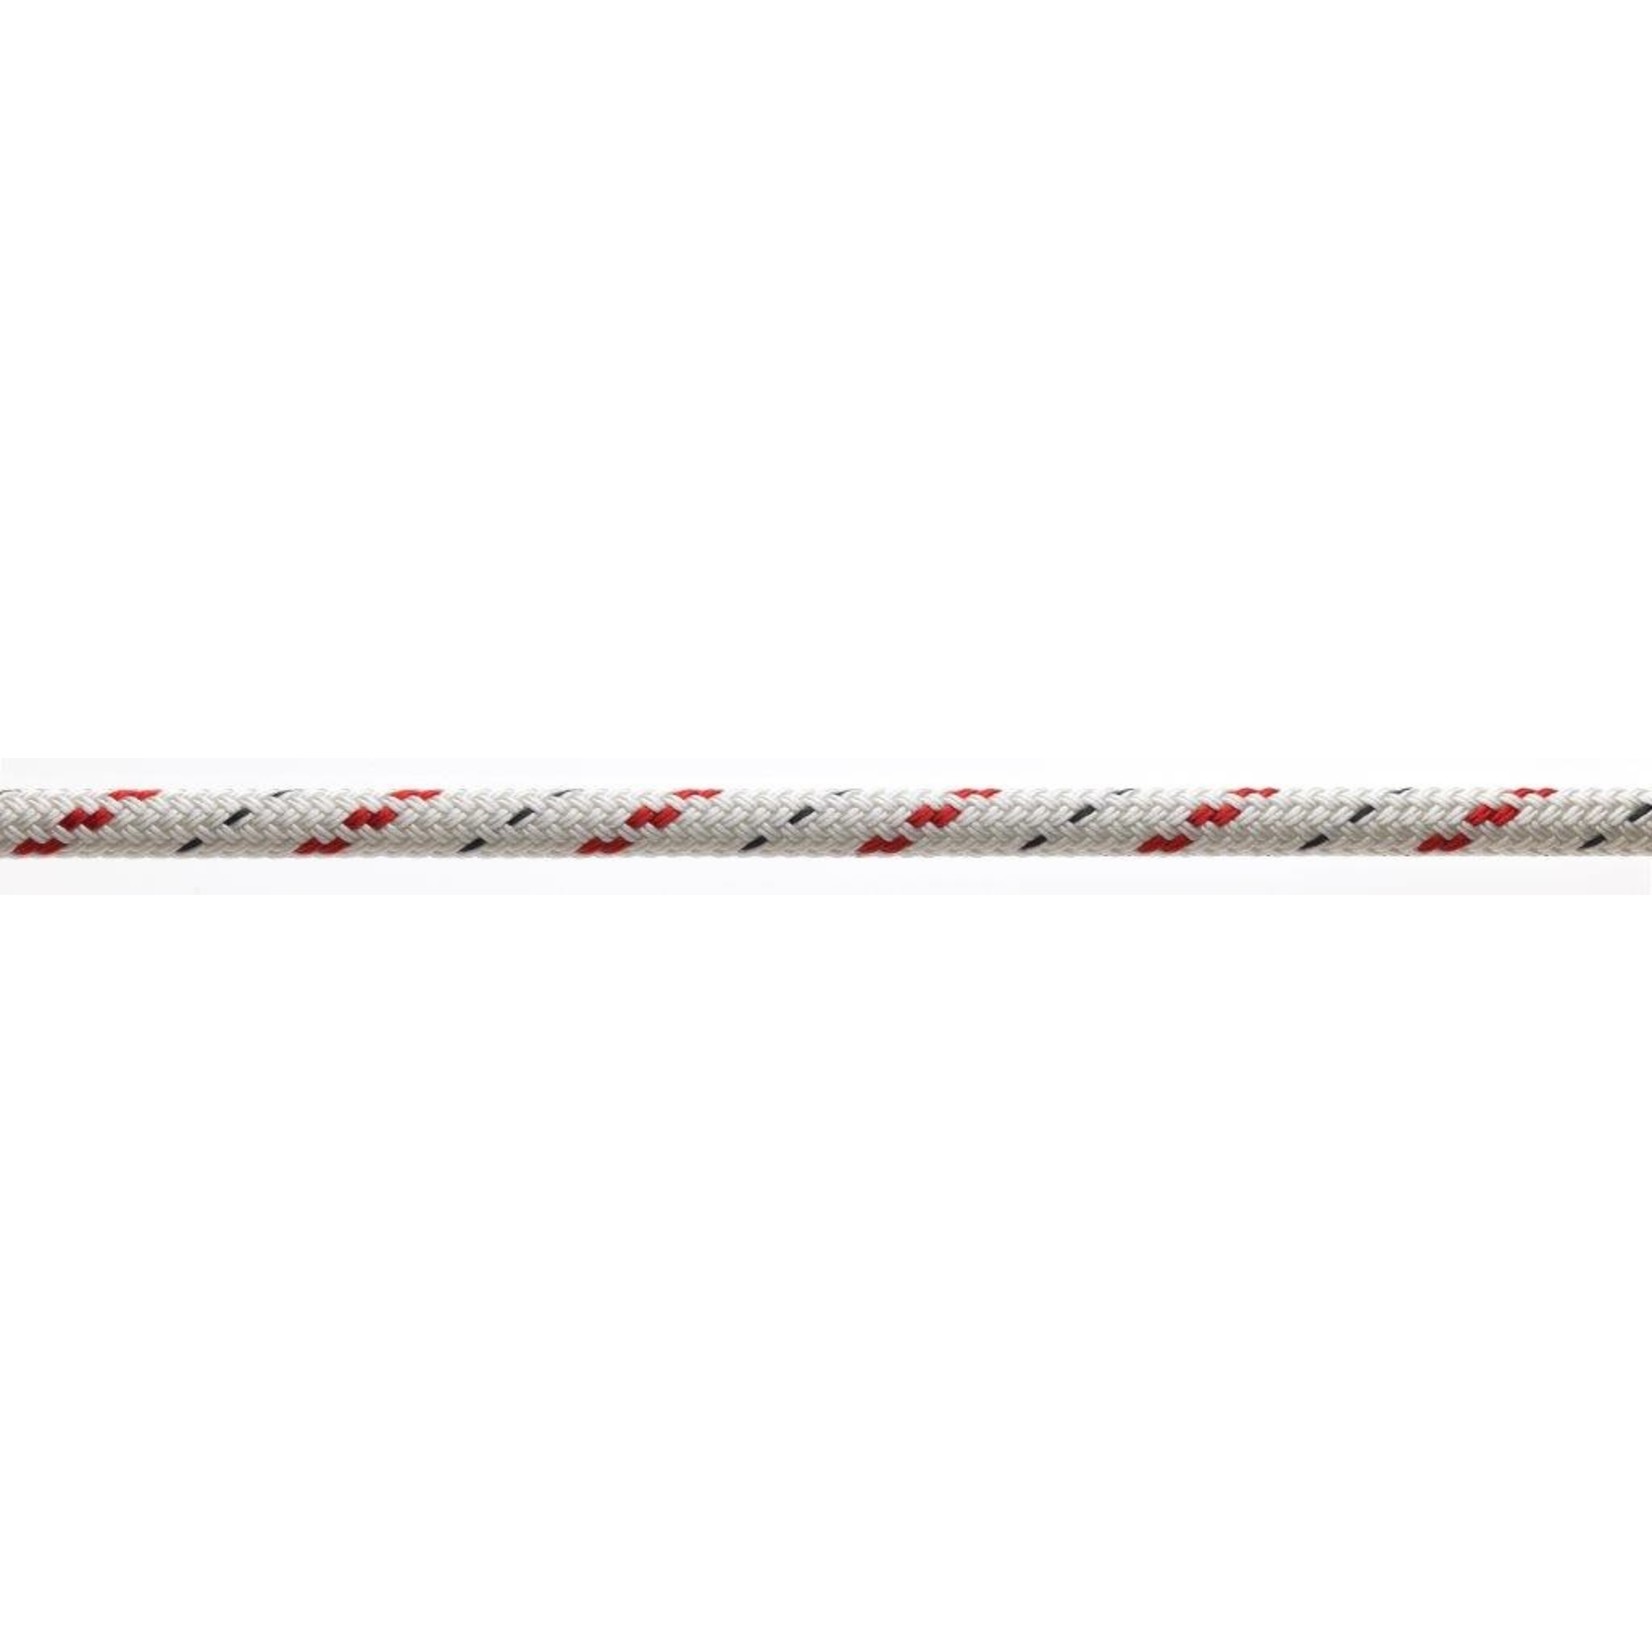 Marlow Doublebraid 10mm. white/red